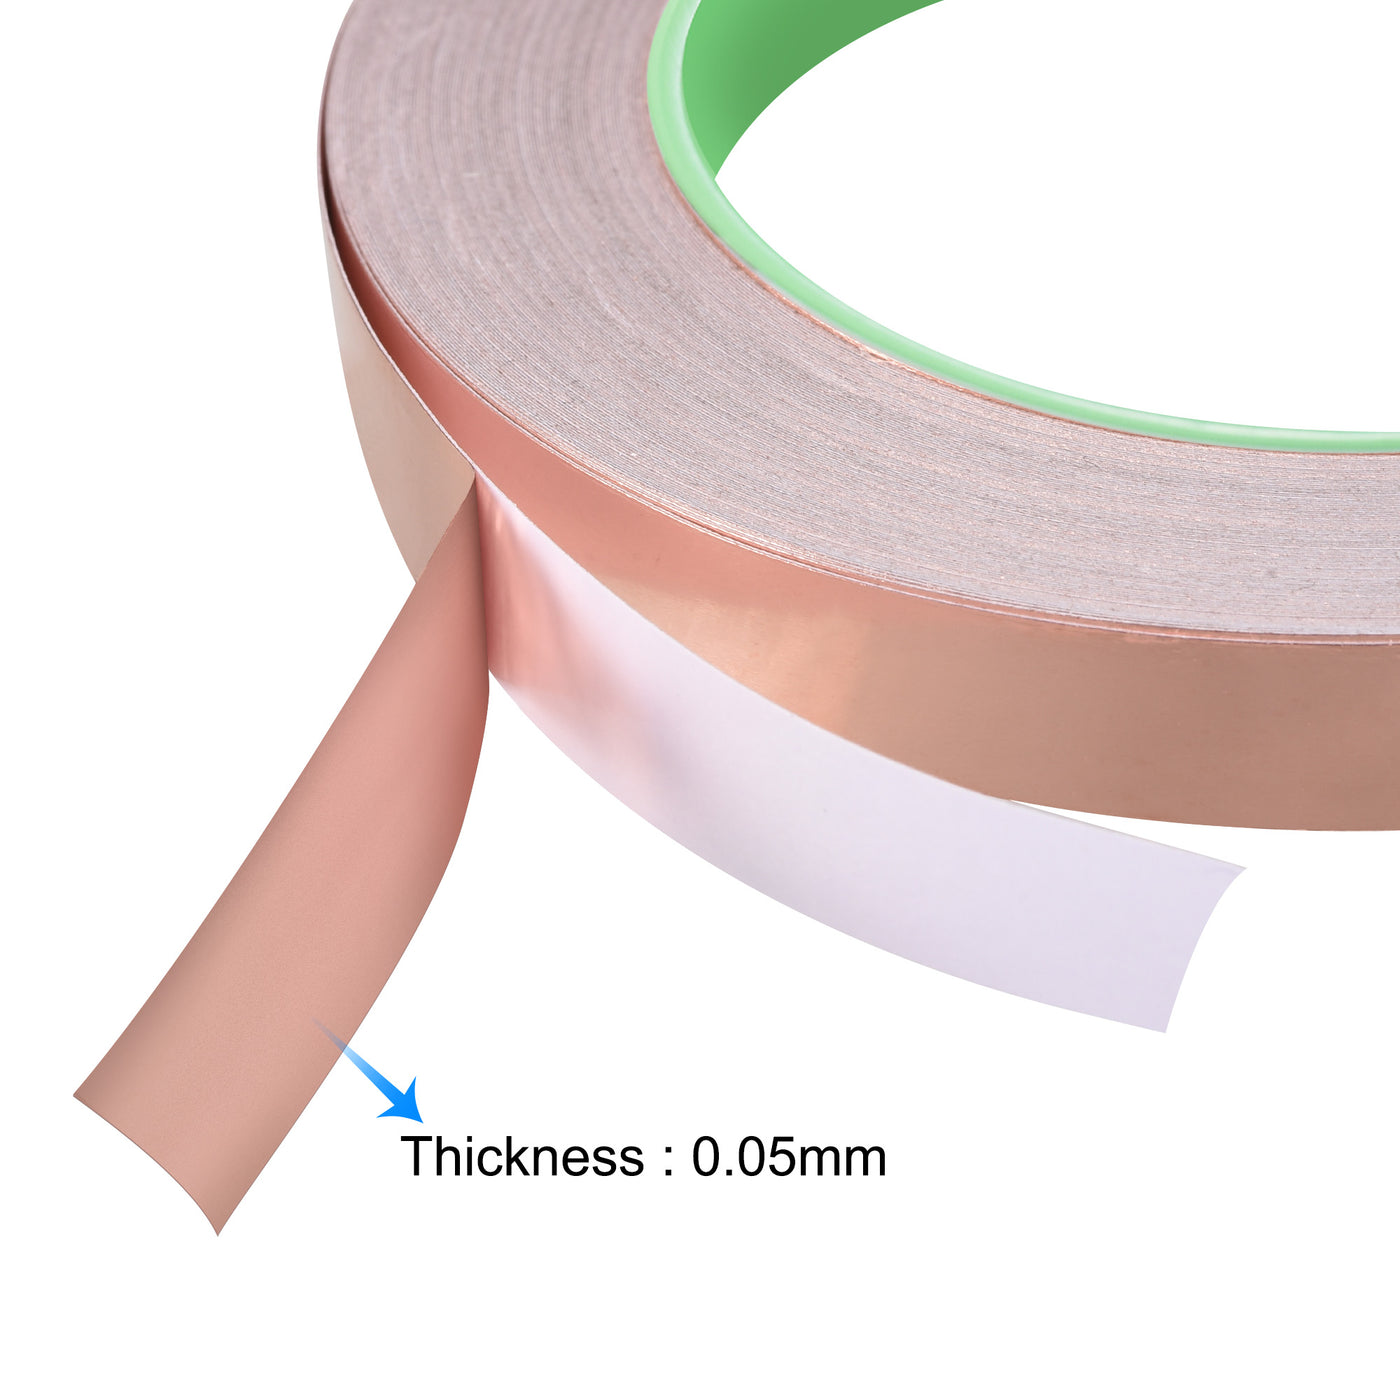 uxcell Uxcell Double-Sided Conductive Tape Copper Foil Tape 4mm x 30m/98.4ft 2pcs